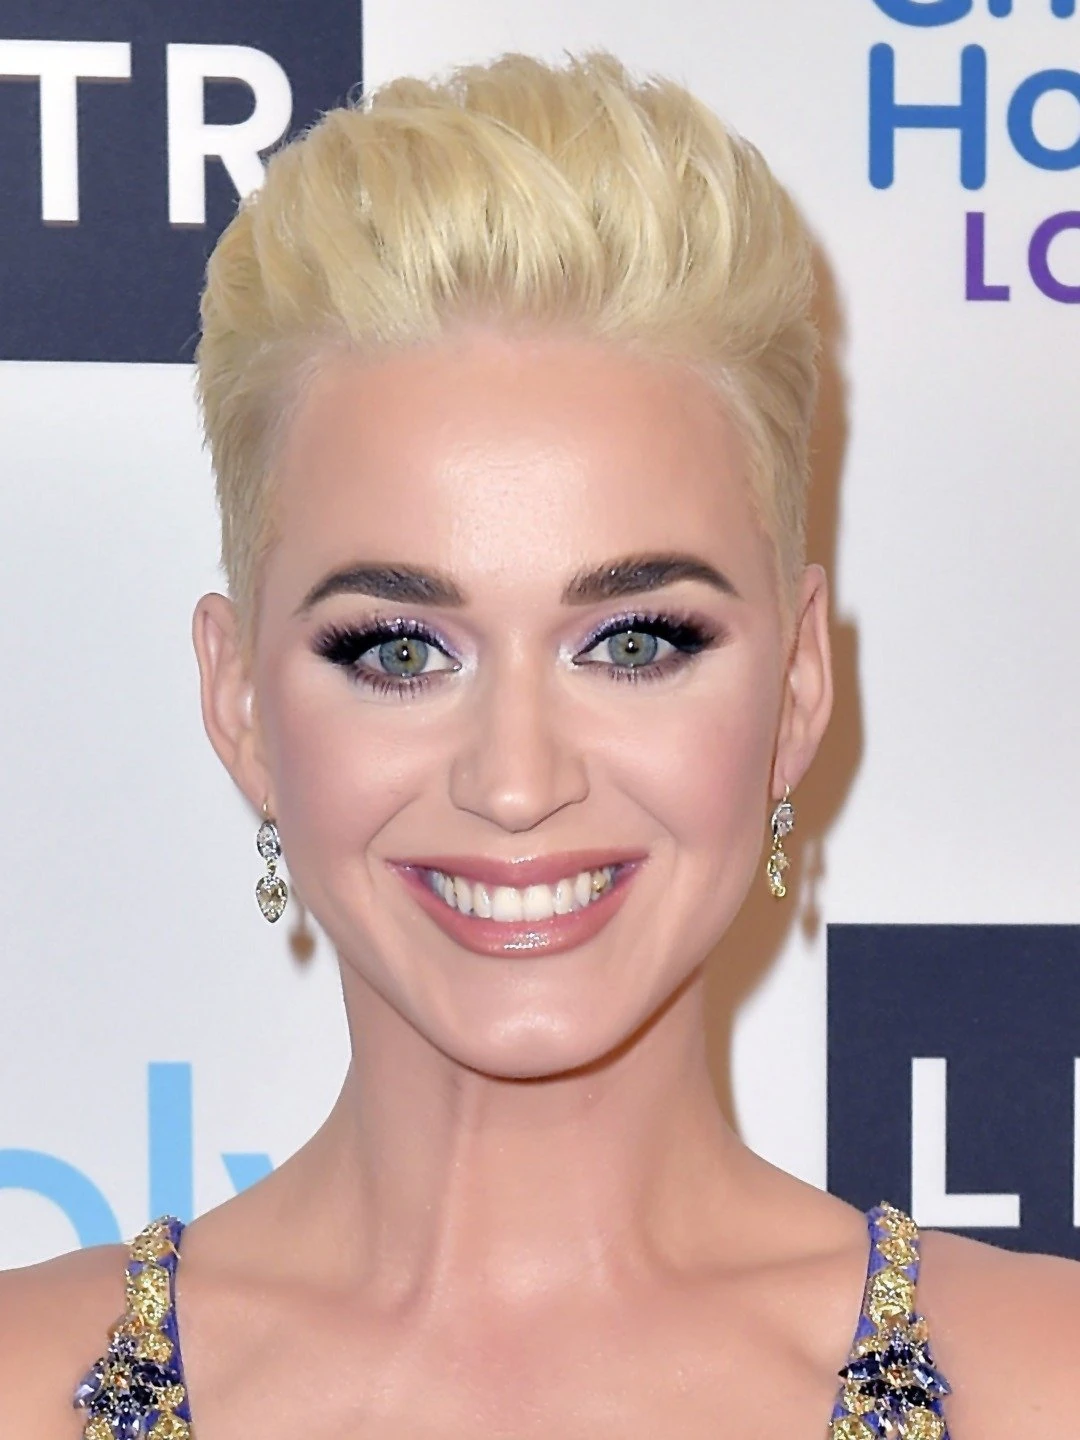 https://static.wikia.nocookie.net/disney/images/c/cd/Katy_Perry.jpg/revision/latest?cb=20180907230836